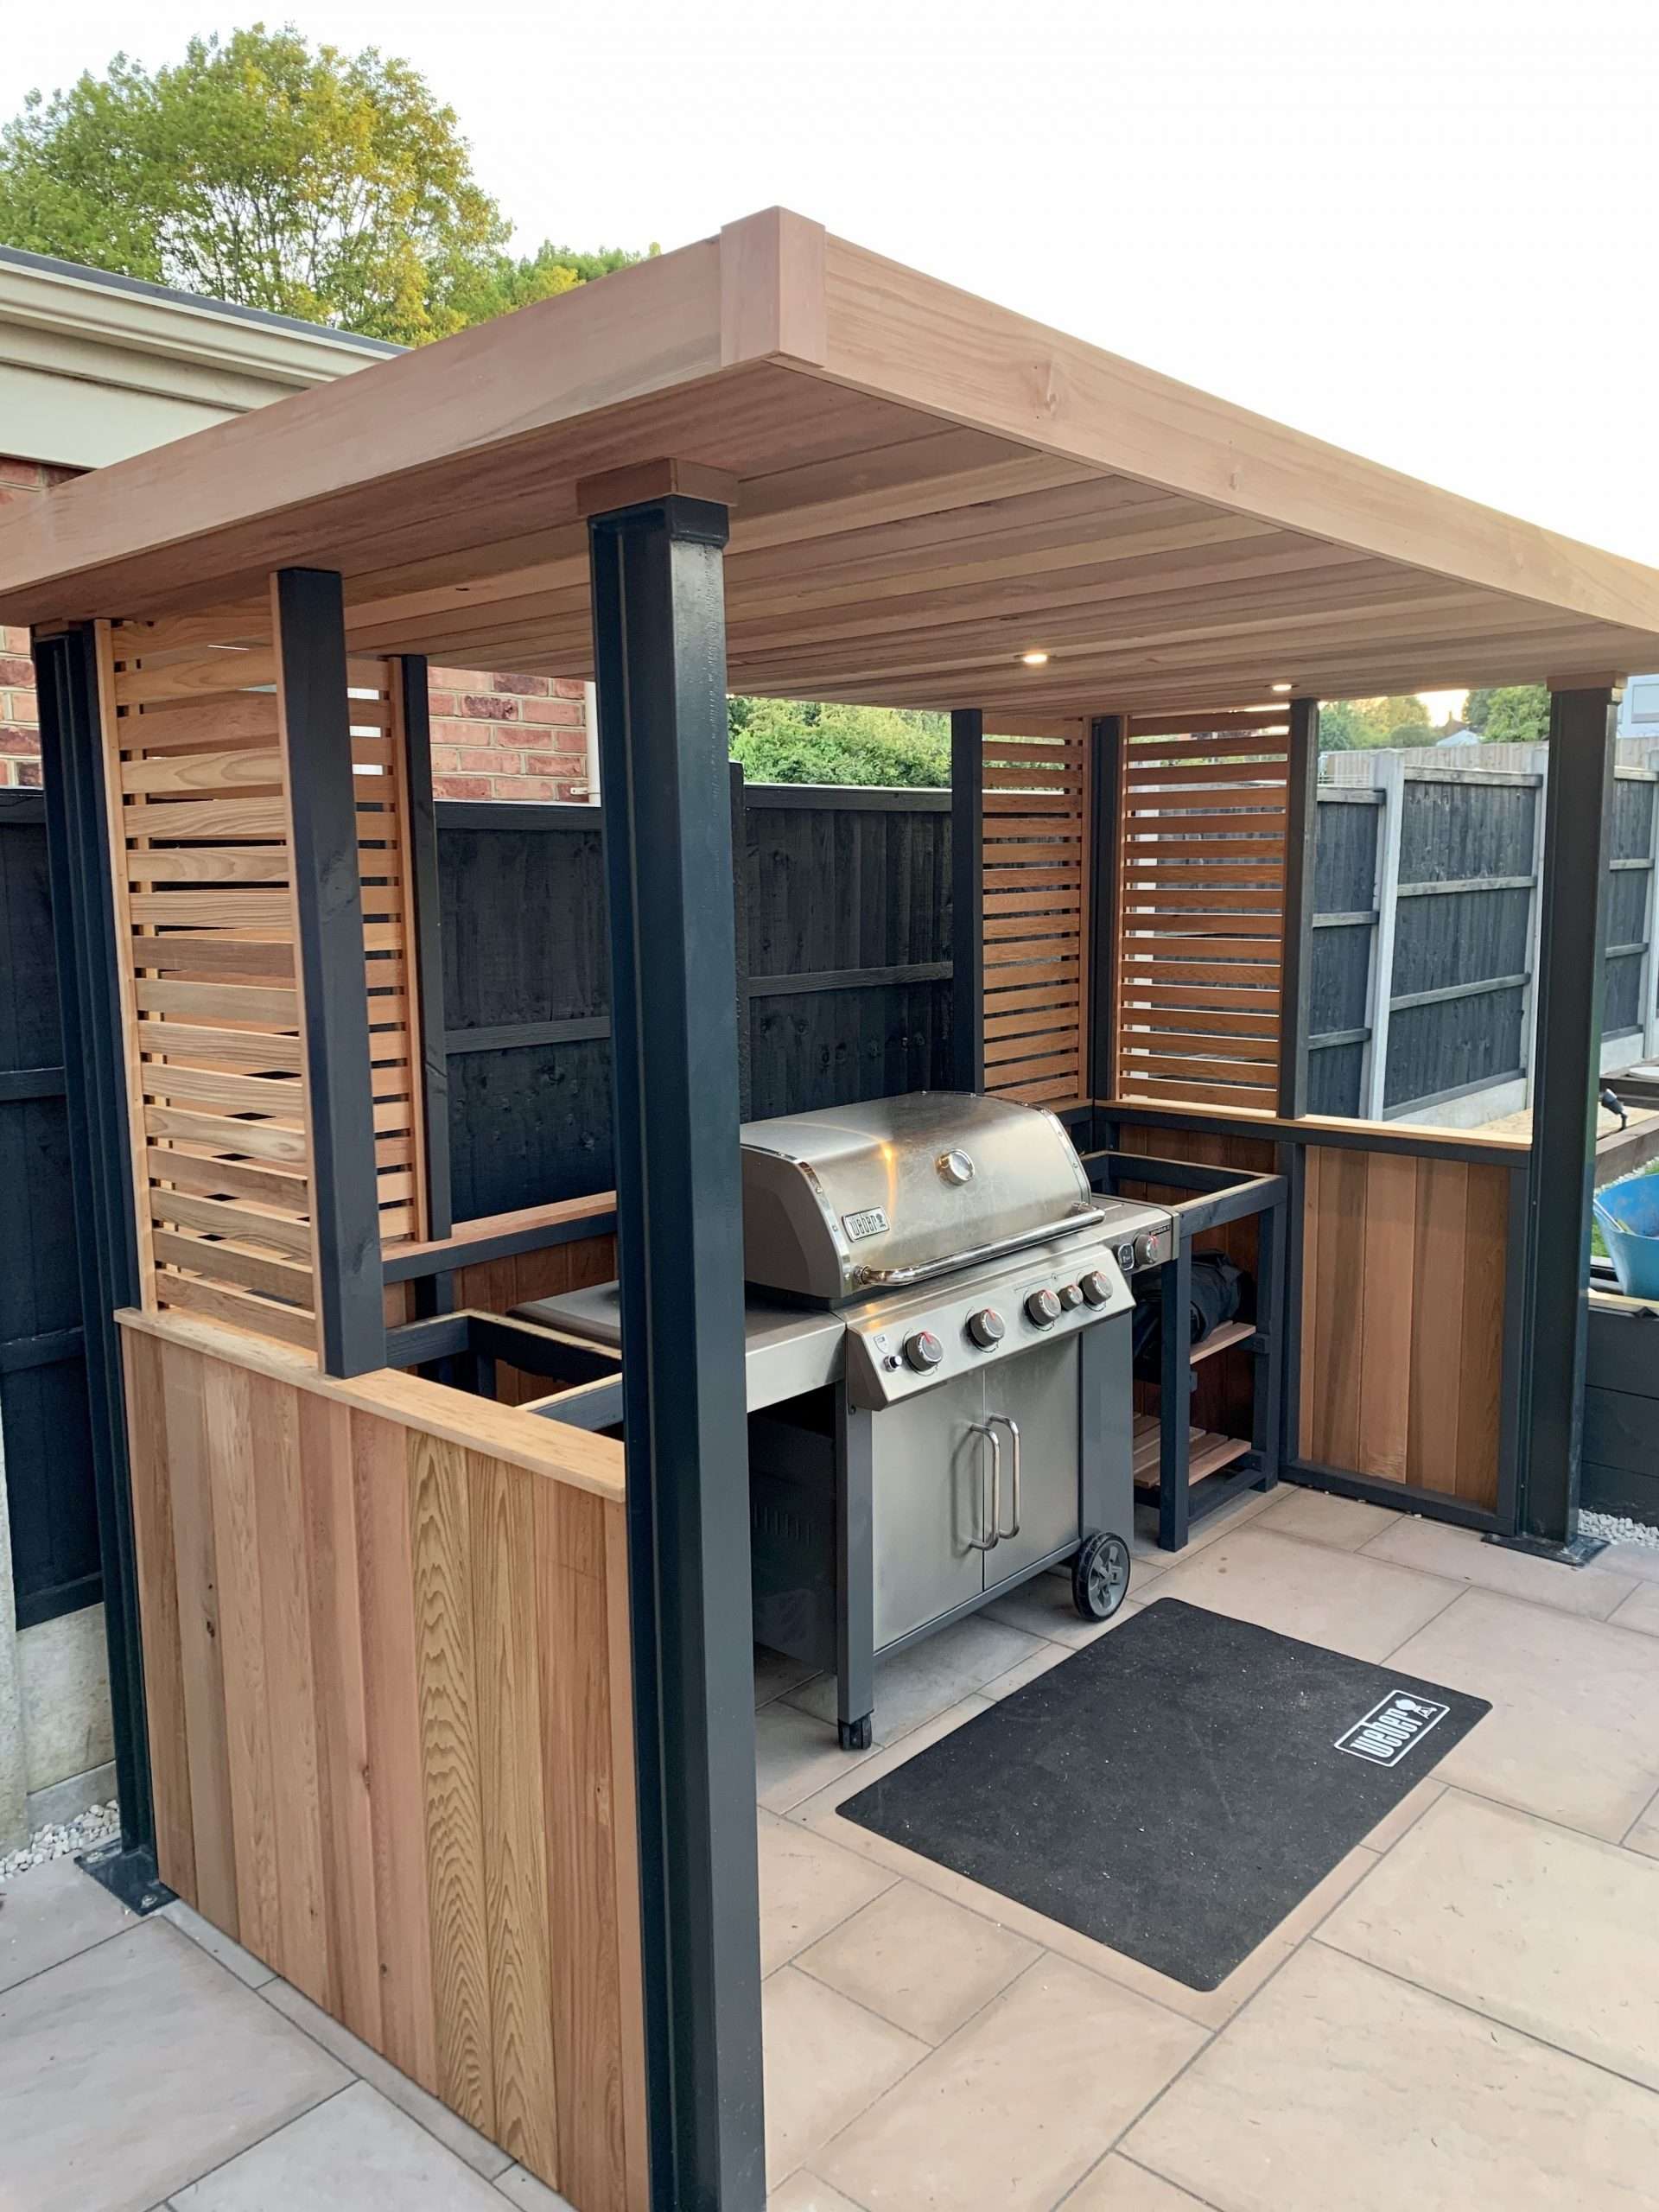 BBQ Shelter from Solace Garden Rooms on Facebook